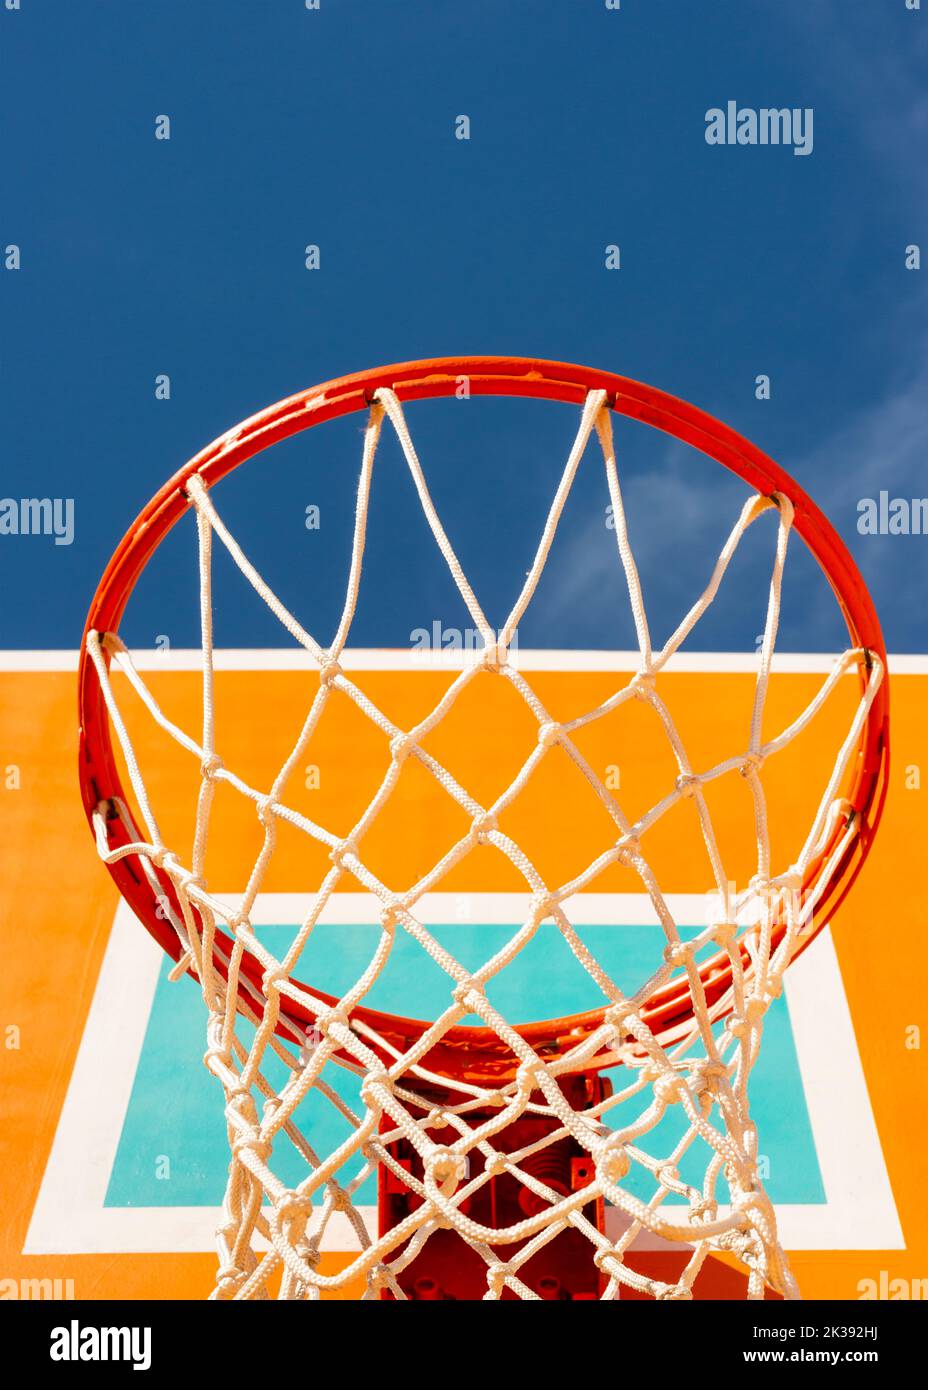 Colorful orange basketball backboard with red hoop and a net against blue sky low angle view. Stock Photo